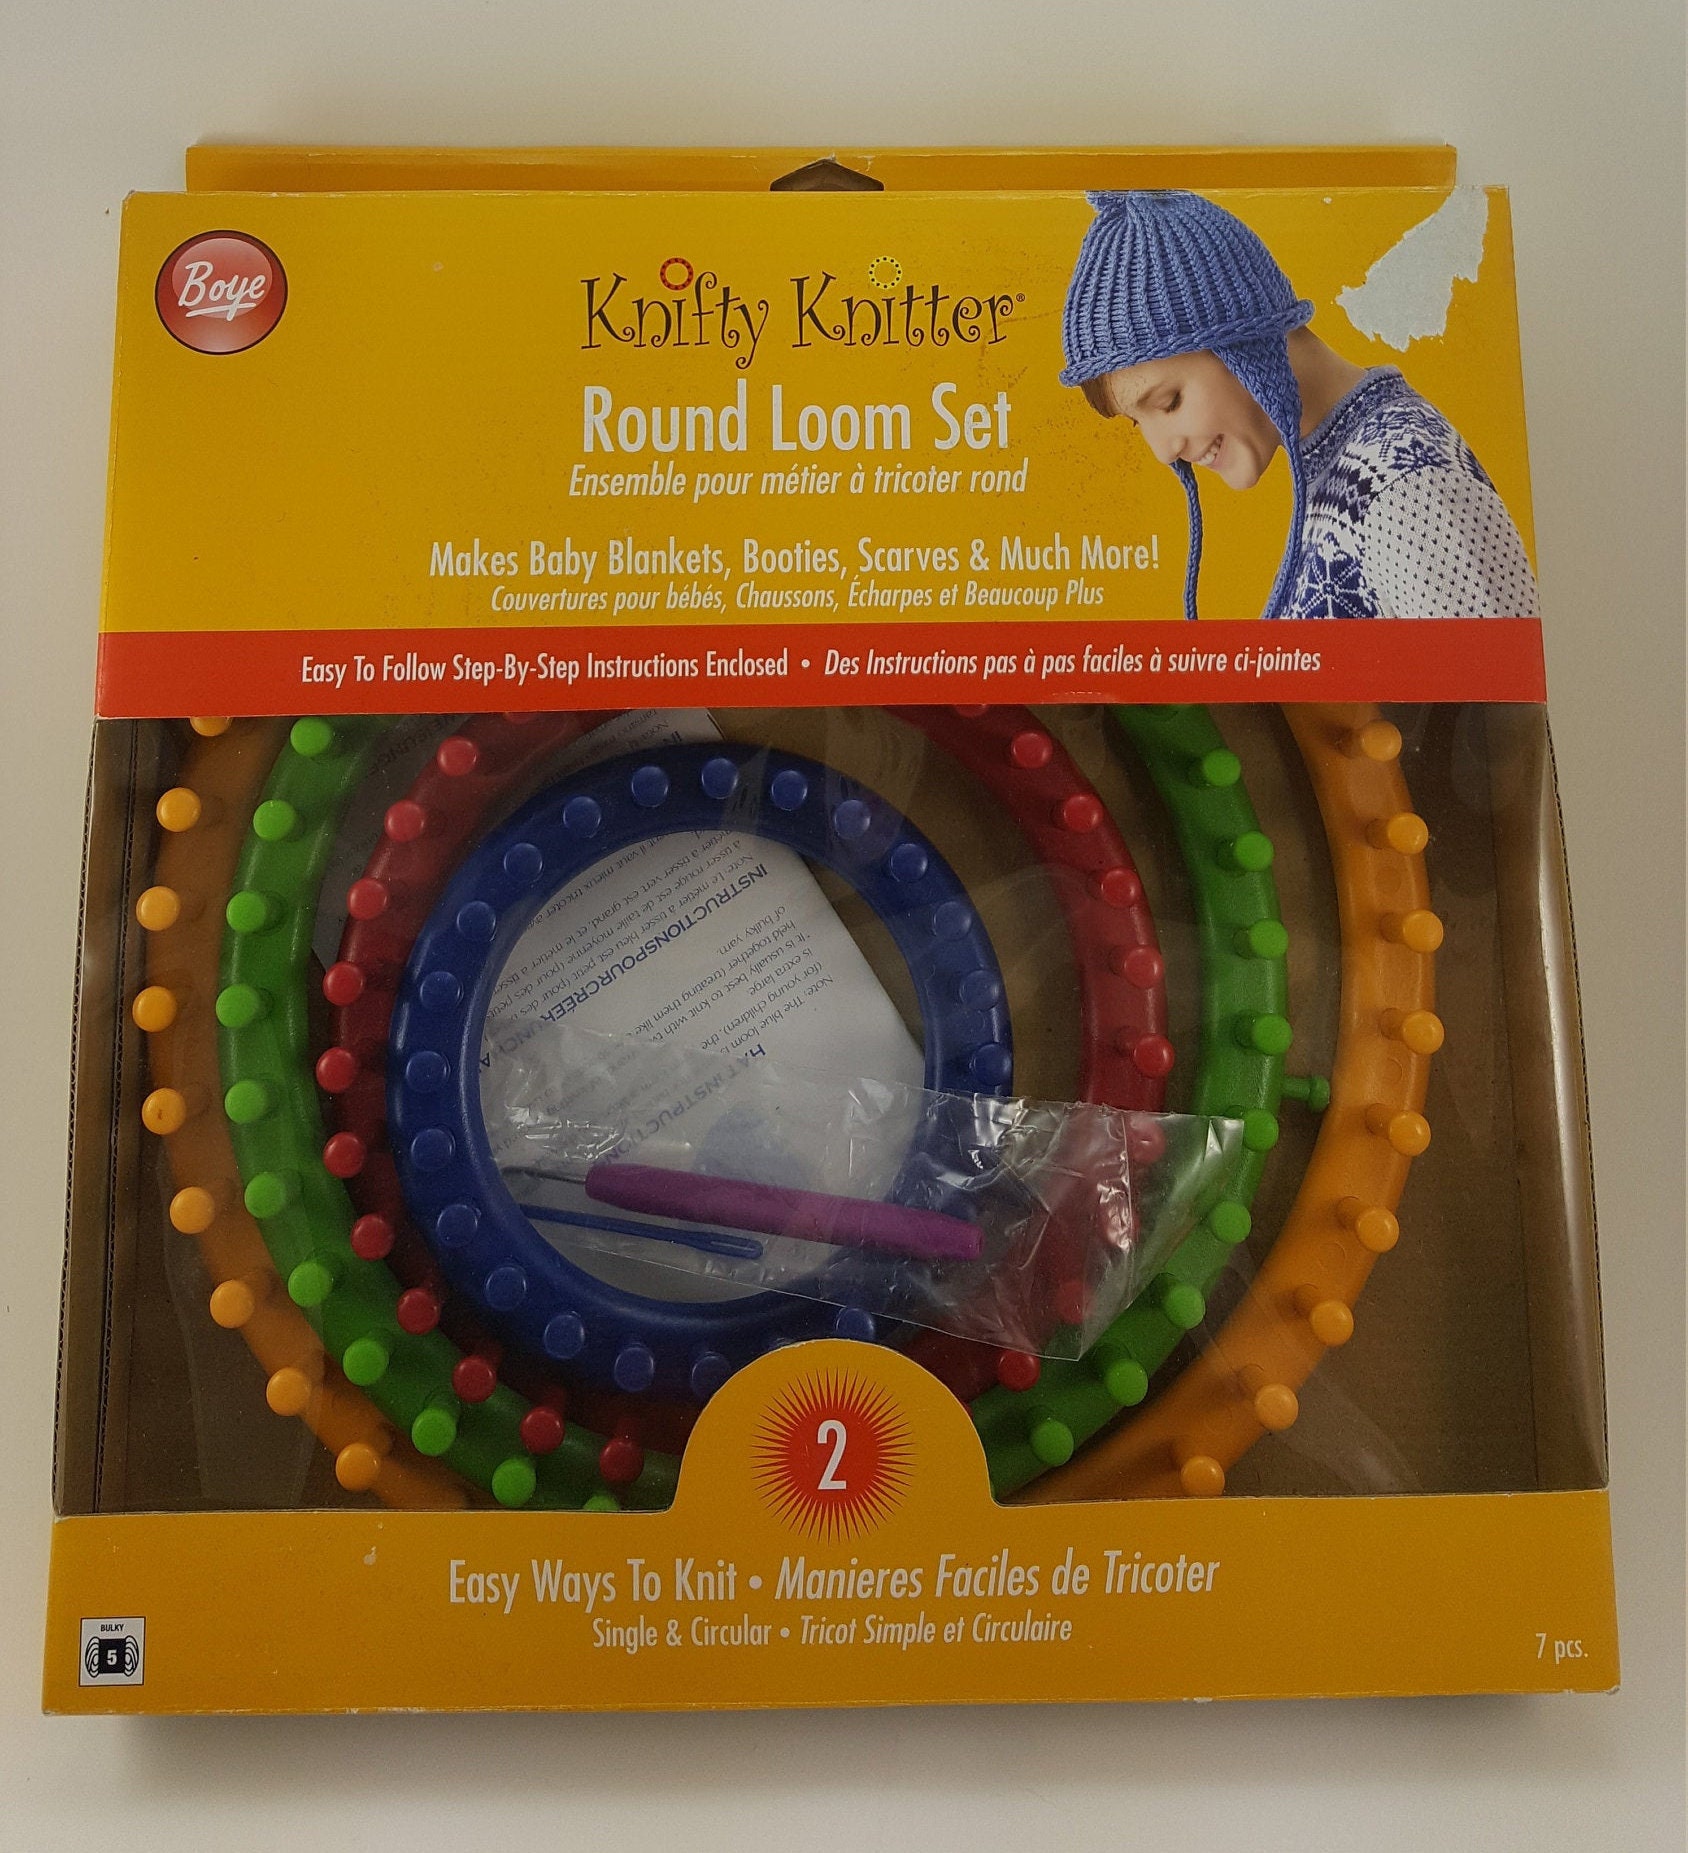 Genuine Knifty Knitter Round Loom Set with 4 Looms, Hook & Bag